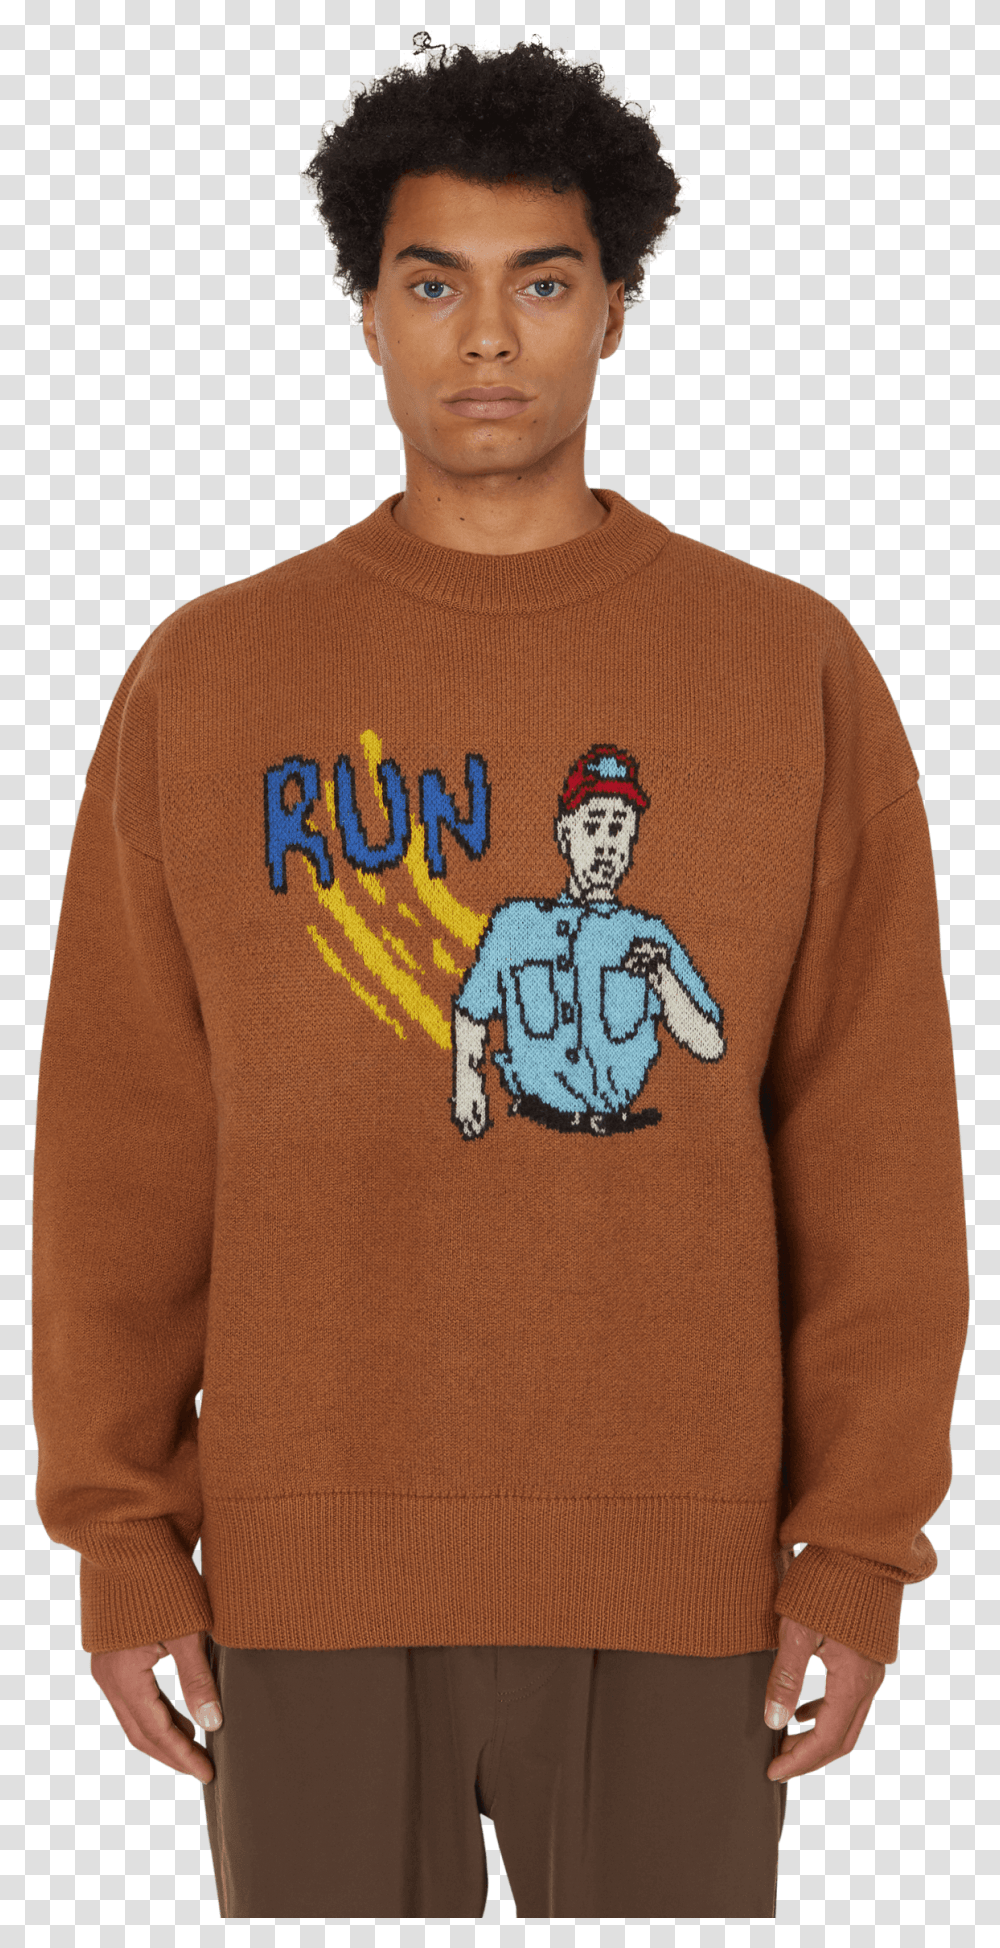 Forrest Gump Jacquard Knitwear Sweater Sweater, Clothing, Apparel, Sweatshirt, Long Sleeve Transparent Png